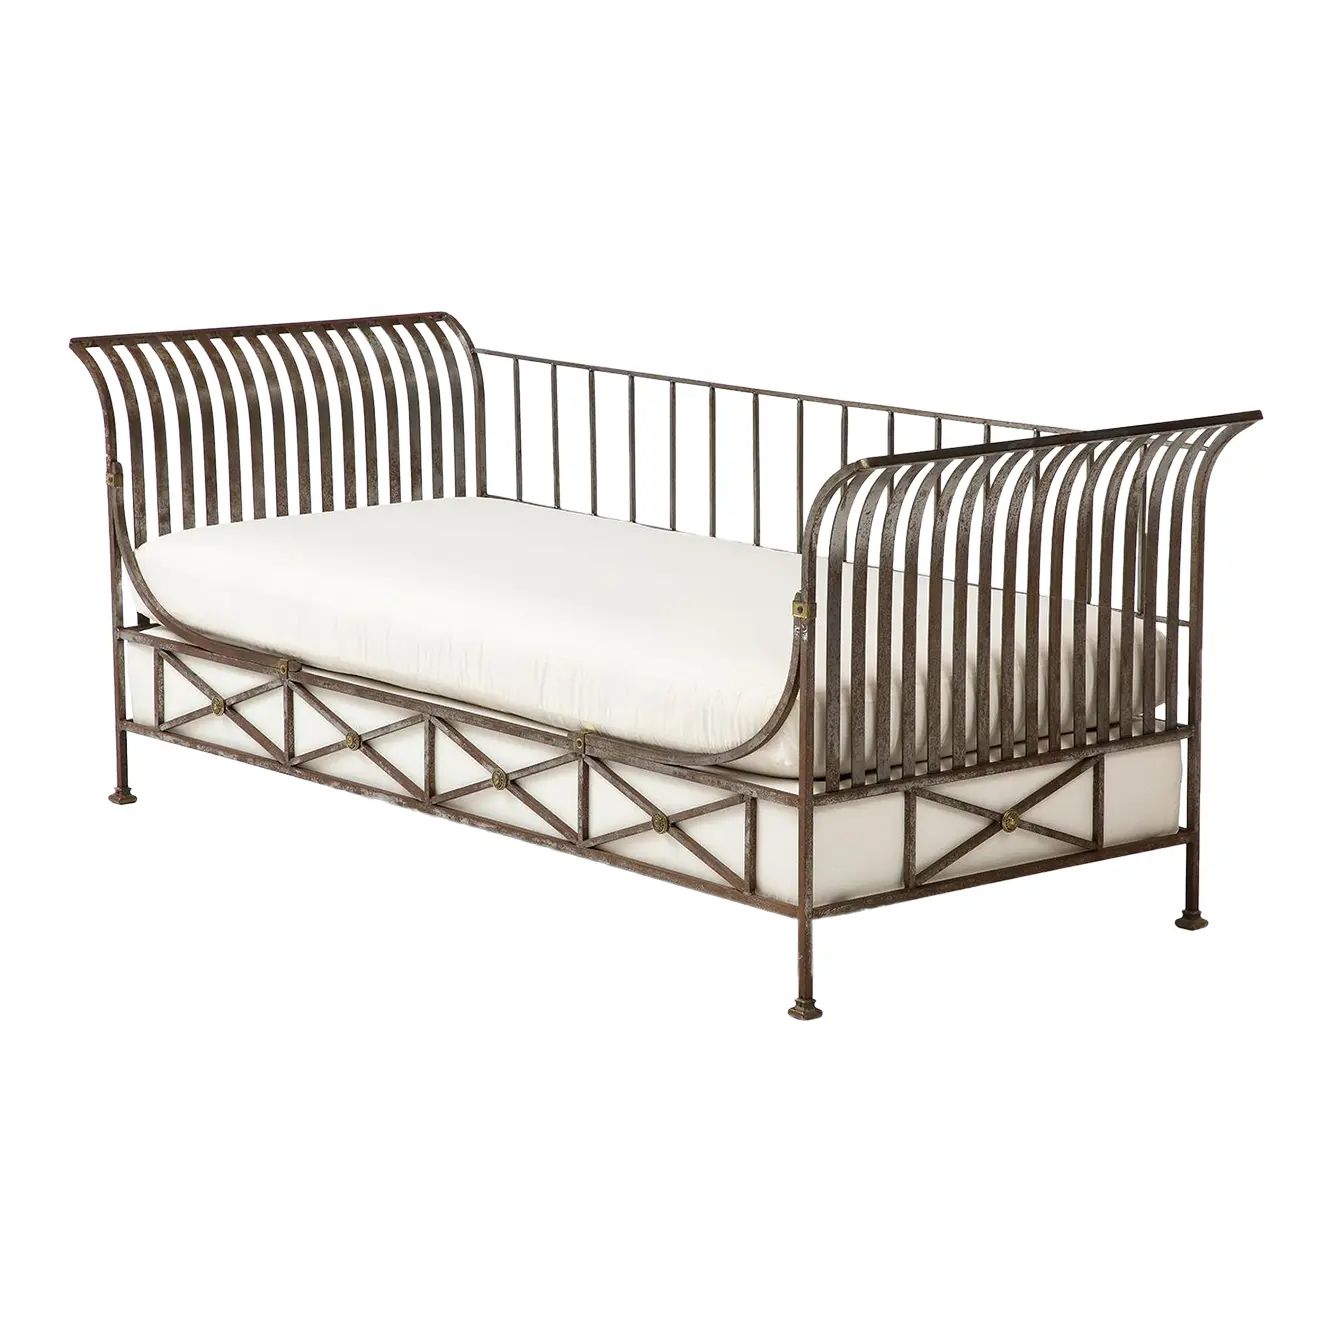 Neoclassical Style Steel Daybed, Circa 1960 | Chairish